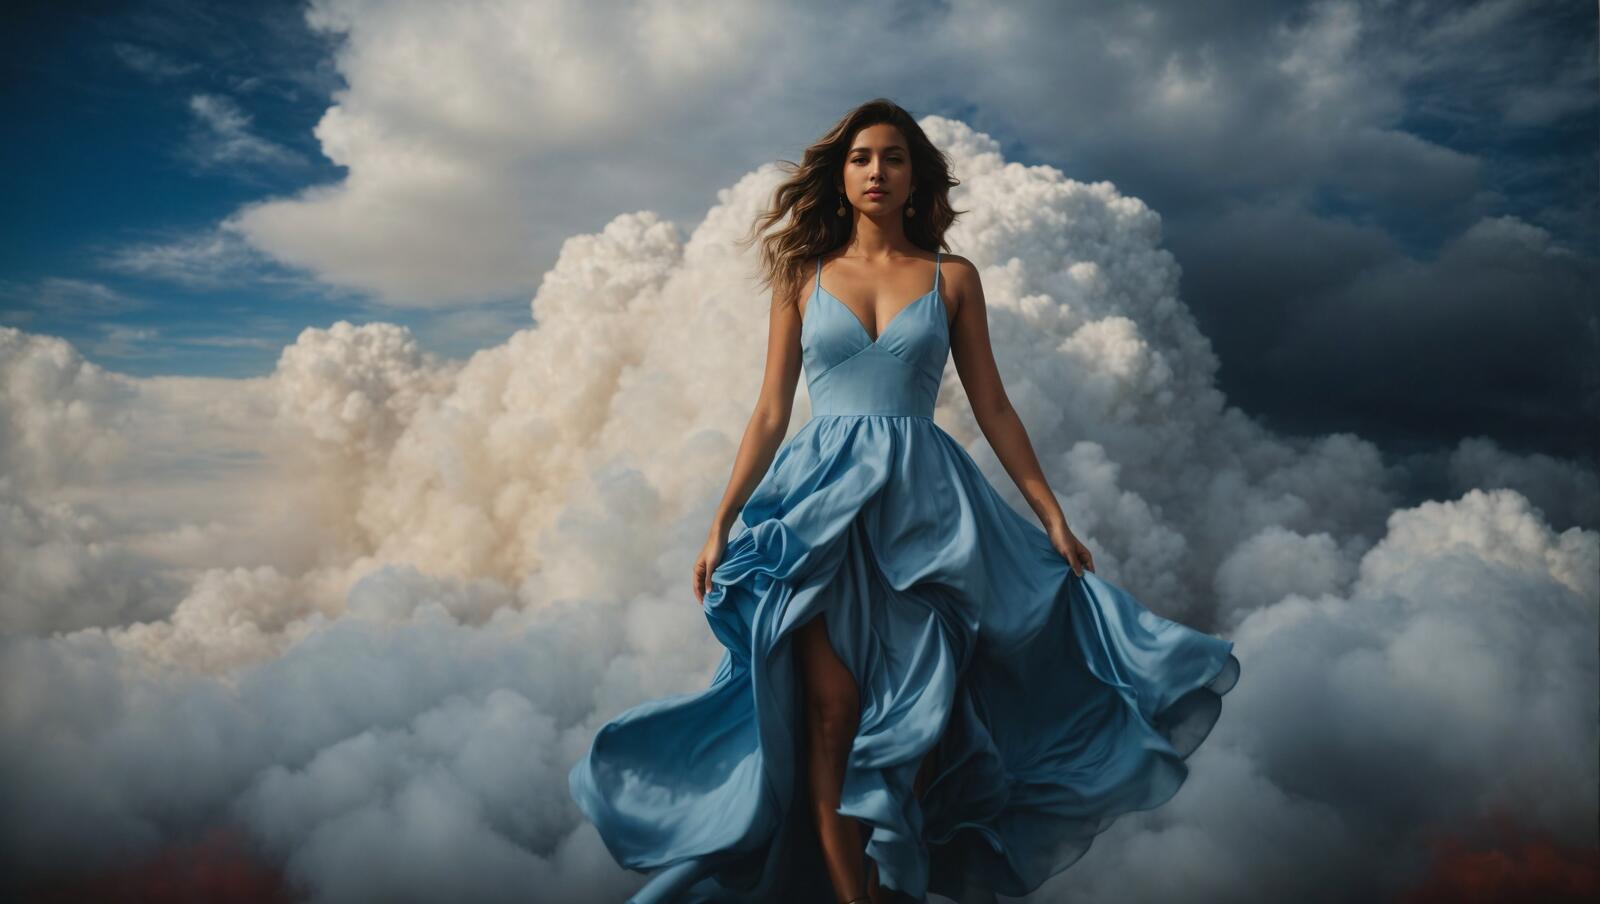 Free photo A woman in a dress is standing on the clouds.